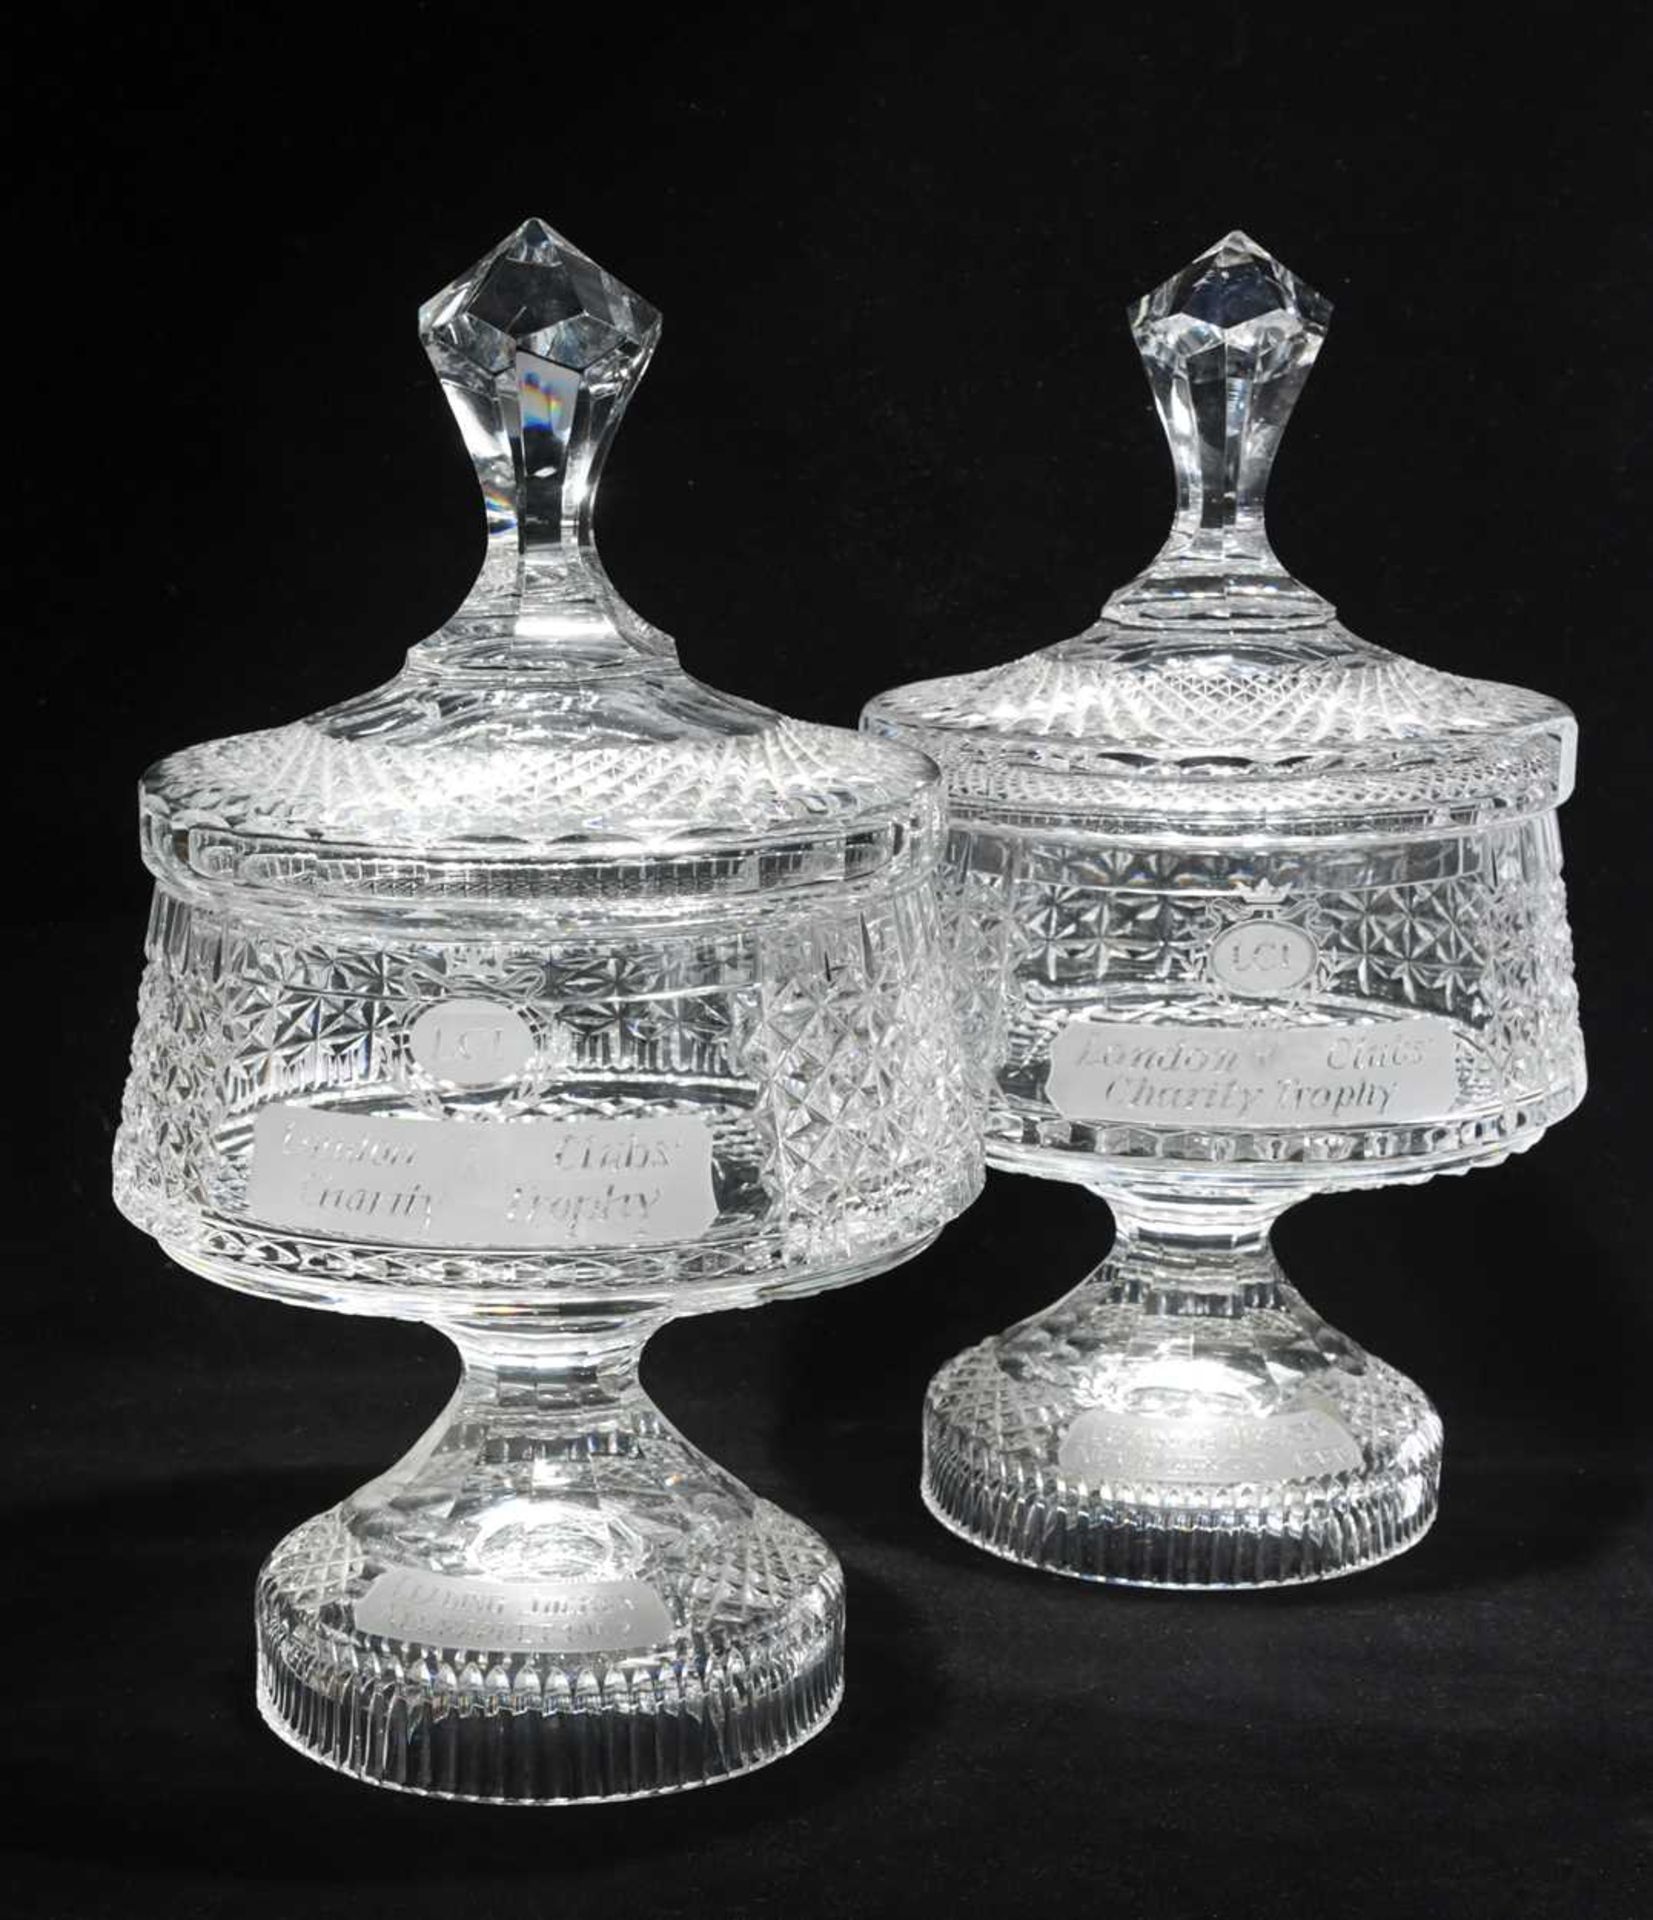 A pair of LCI London Clubs' Charity, Newmarket, cut glass trophies, awarded to Frankie Dettori,